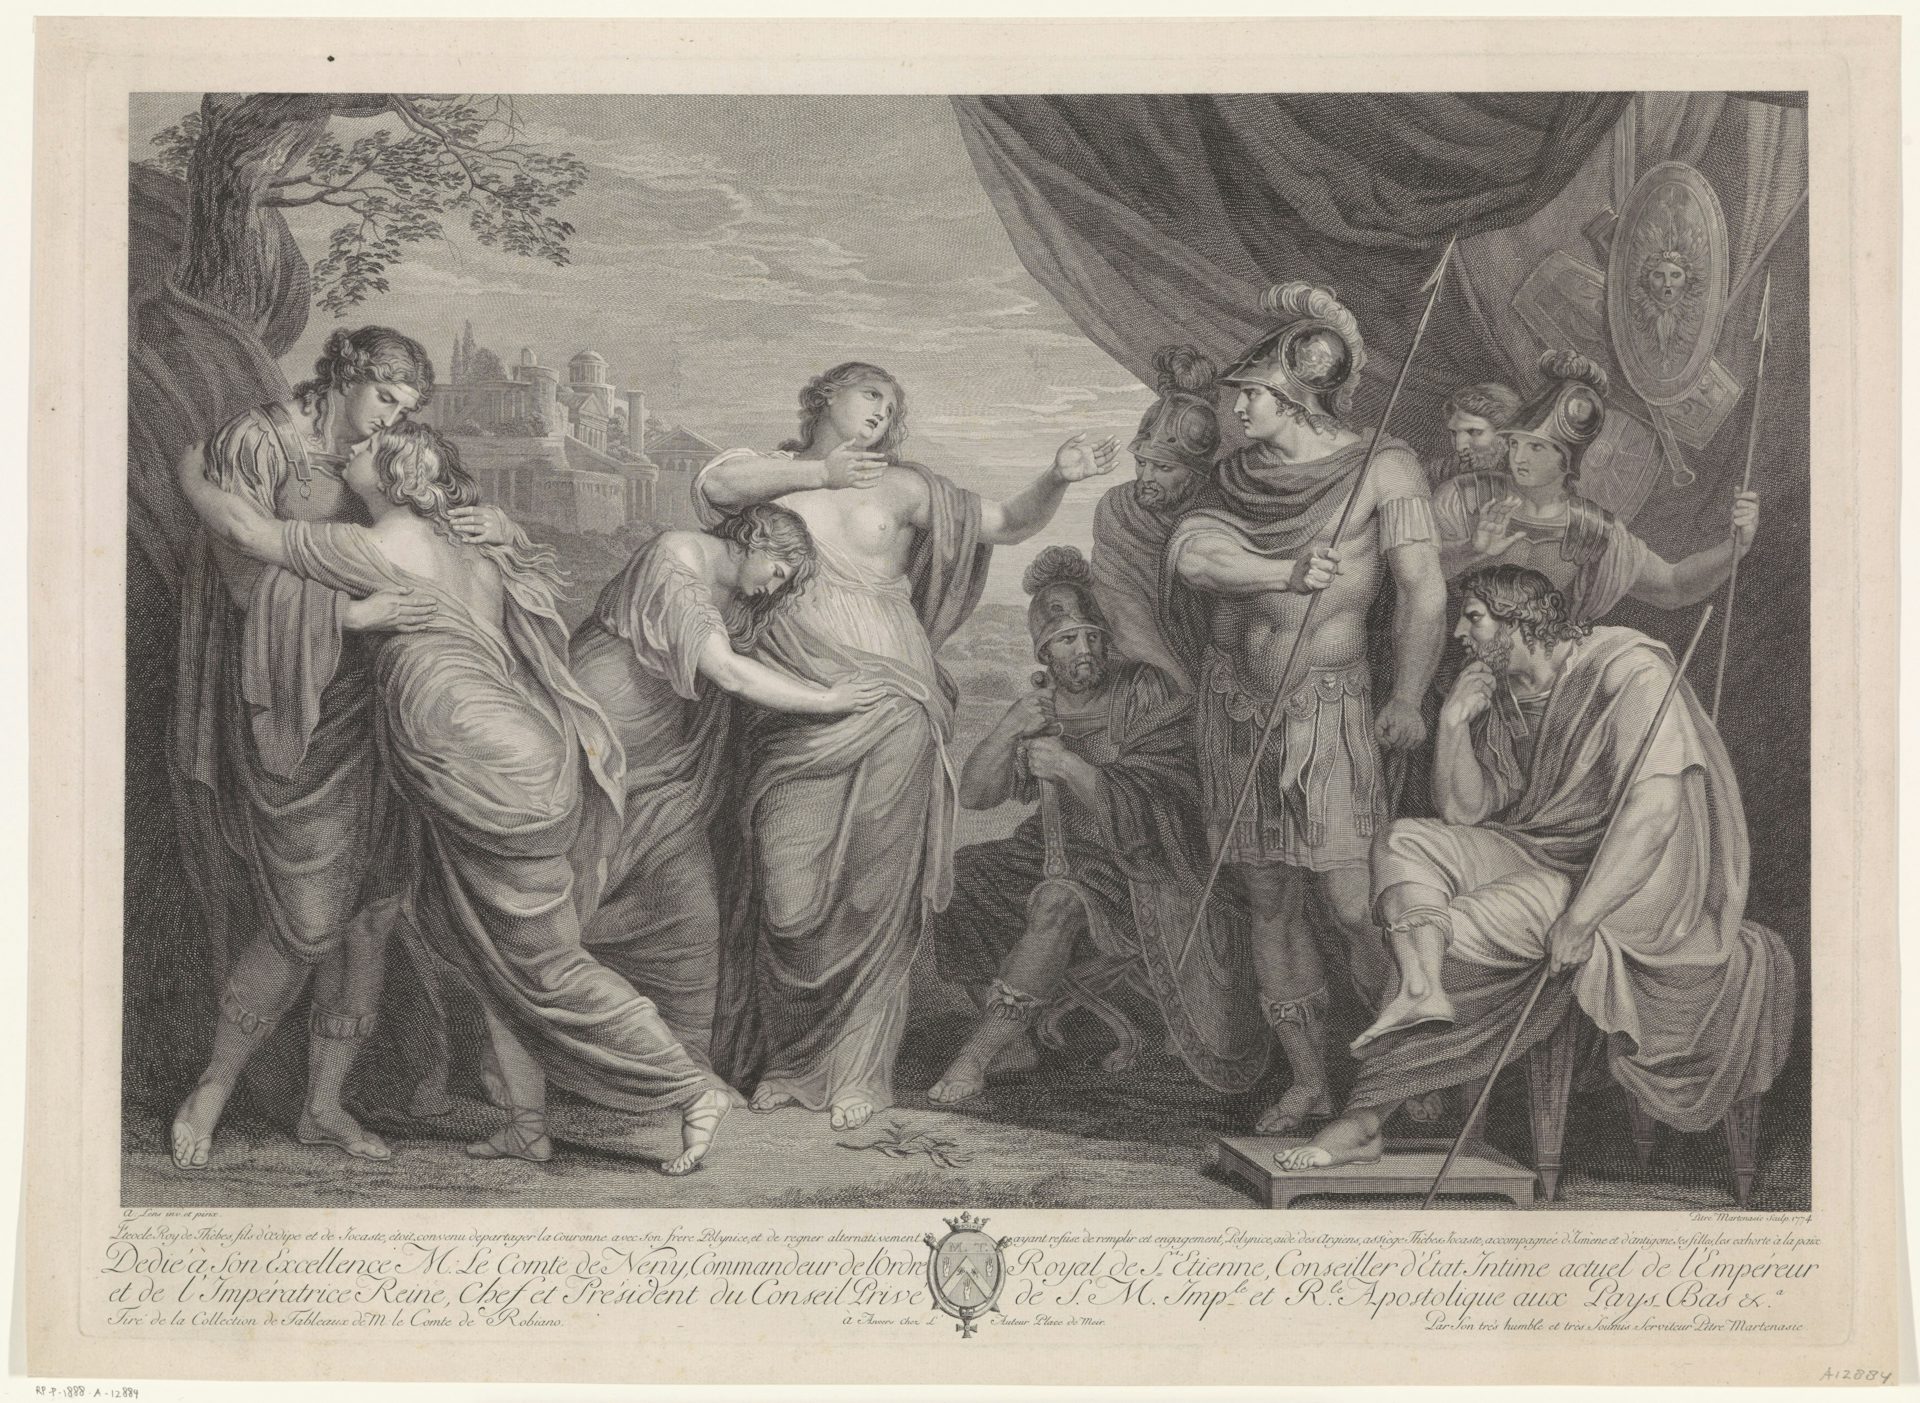 Eteocles and Polynices Exhorted to Make Peace by their Mother Jocasta by Pieter Franciscus Martenasie, after Andries Lens